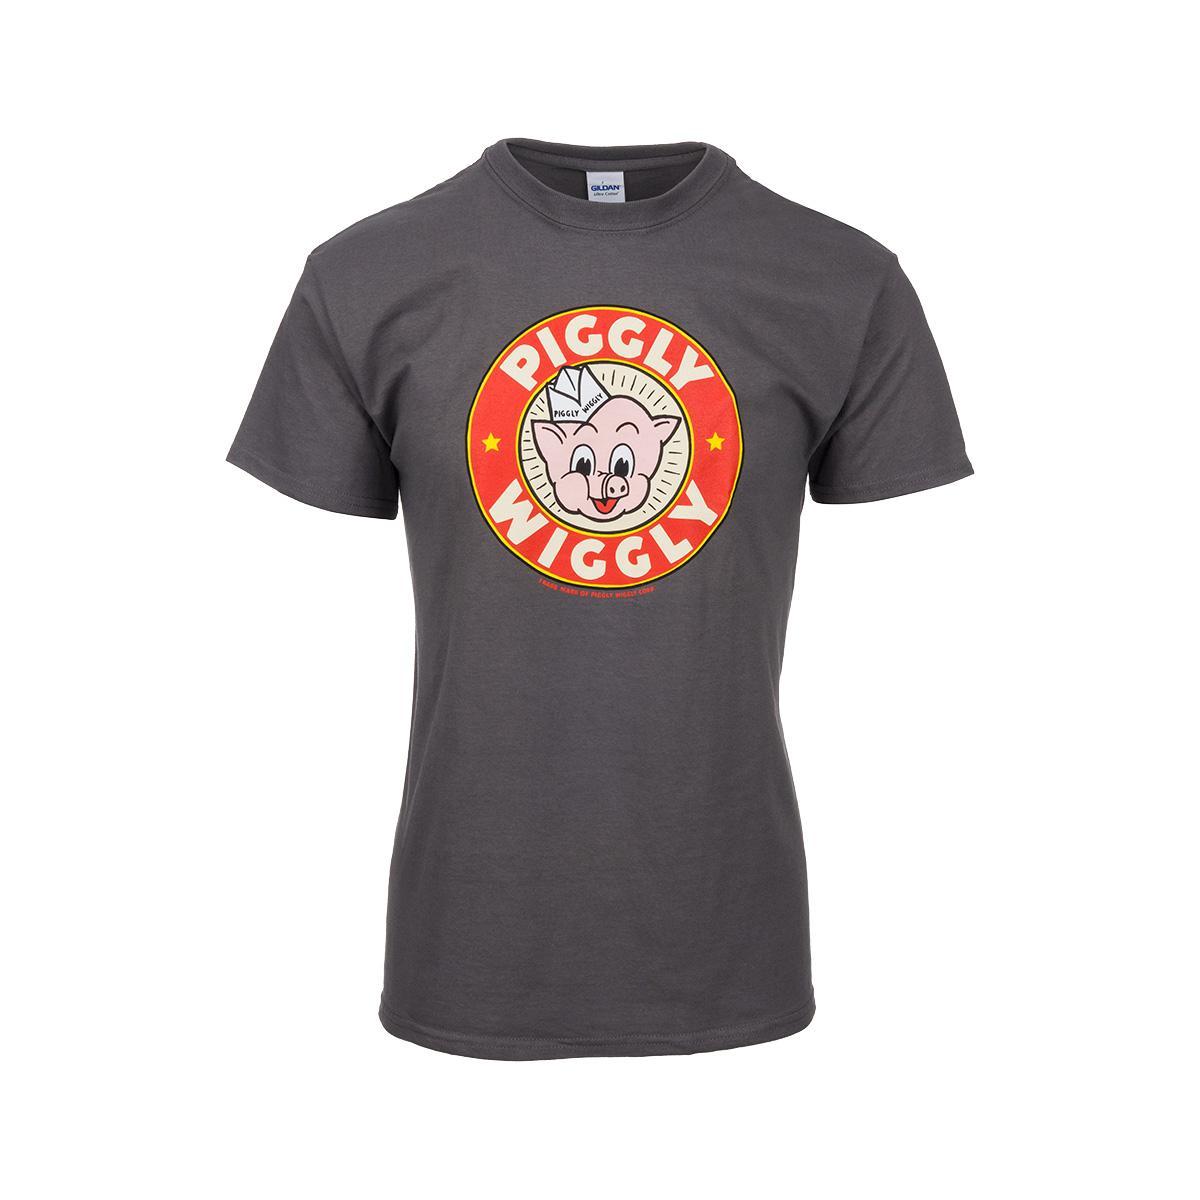 Grocery Store Starts with T Logo - WILDWOOD PRODUCTIONS | Piggly Wiggly Tee - Charcoal Logo